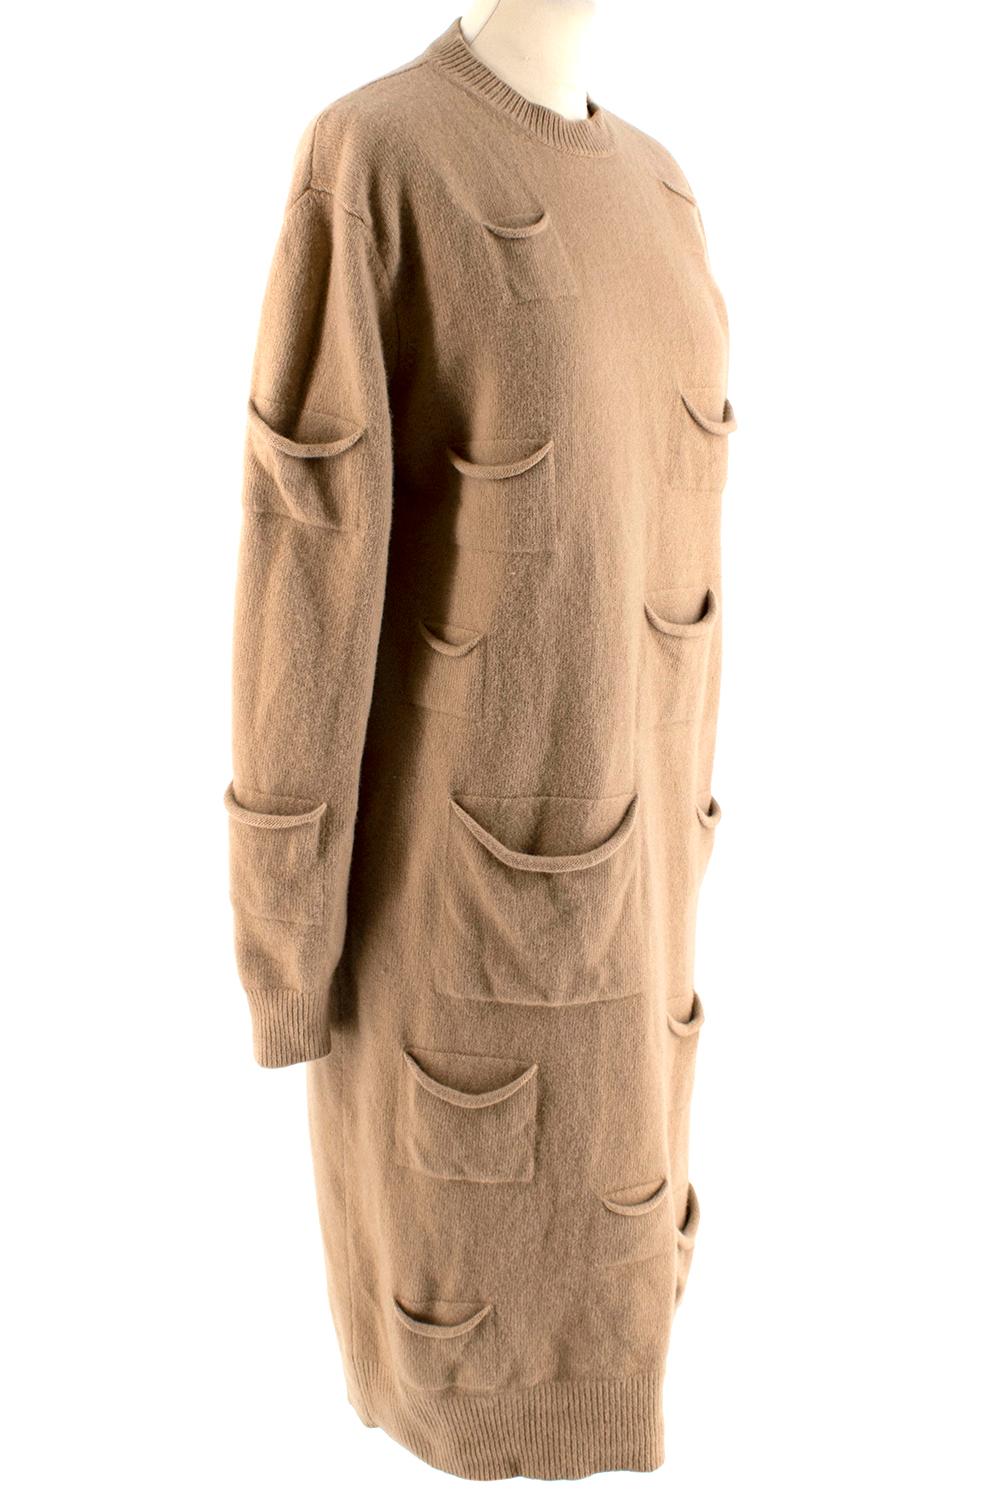 J.W. Anderson Camel Wool & Cashmere Pocket Details Knit Dress

- Made of a luxurious and soft cashmere and wool blend 
- Classic cut 
- Round neckline 
- Pockets detail throughout 
- Ribbed cuffs and hem 
- Fun comfortable design 

Materials:
90%